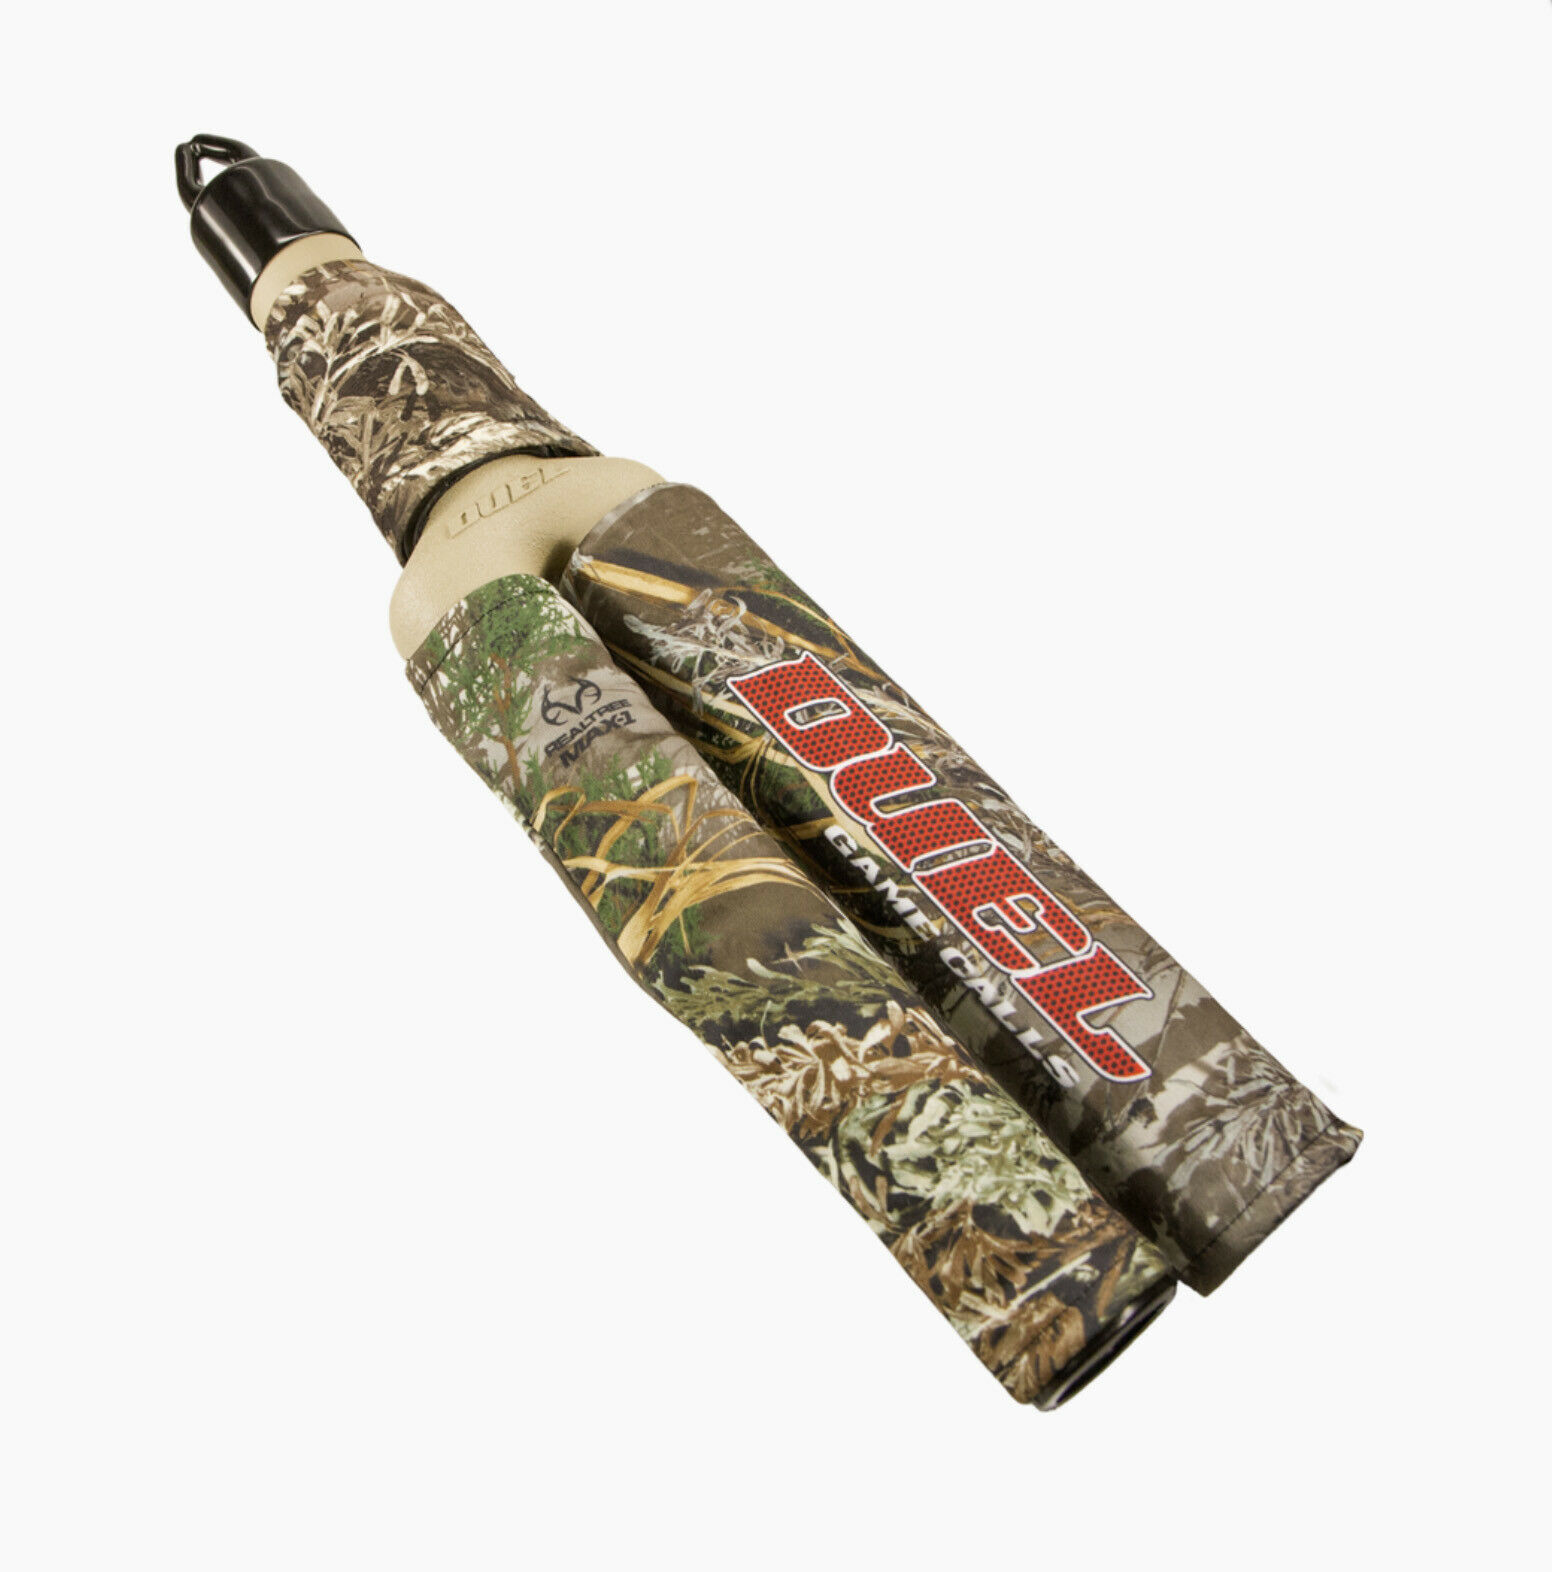 Duel Game Calls Elk Bugle Mountain Thunder 17" Compact Outfitter Locator Call